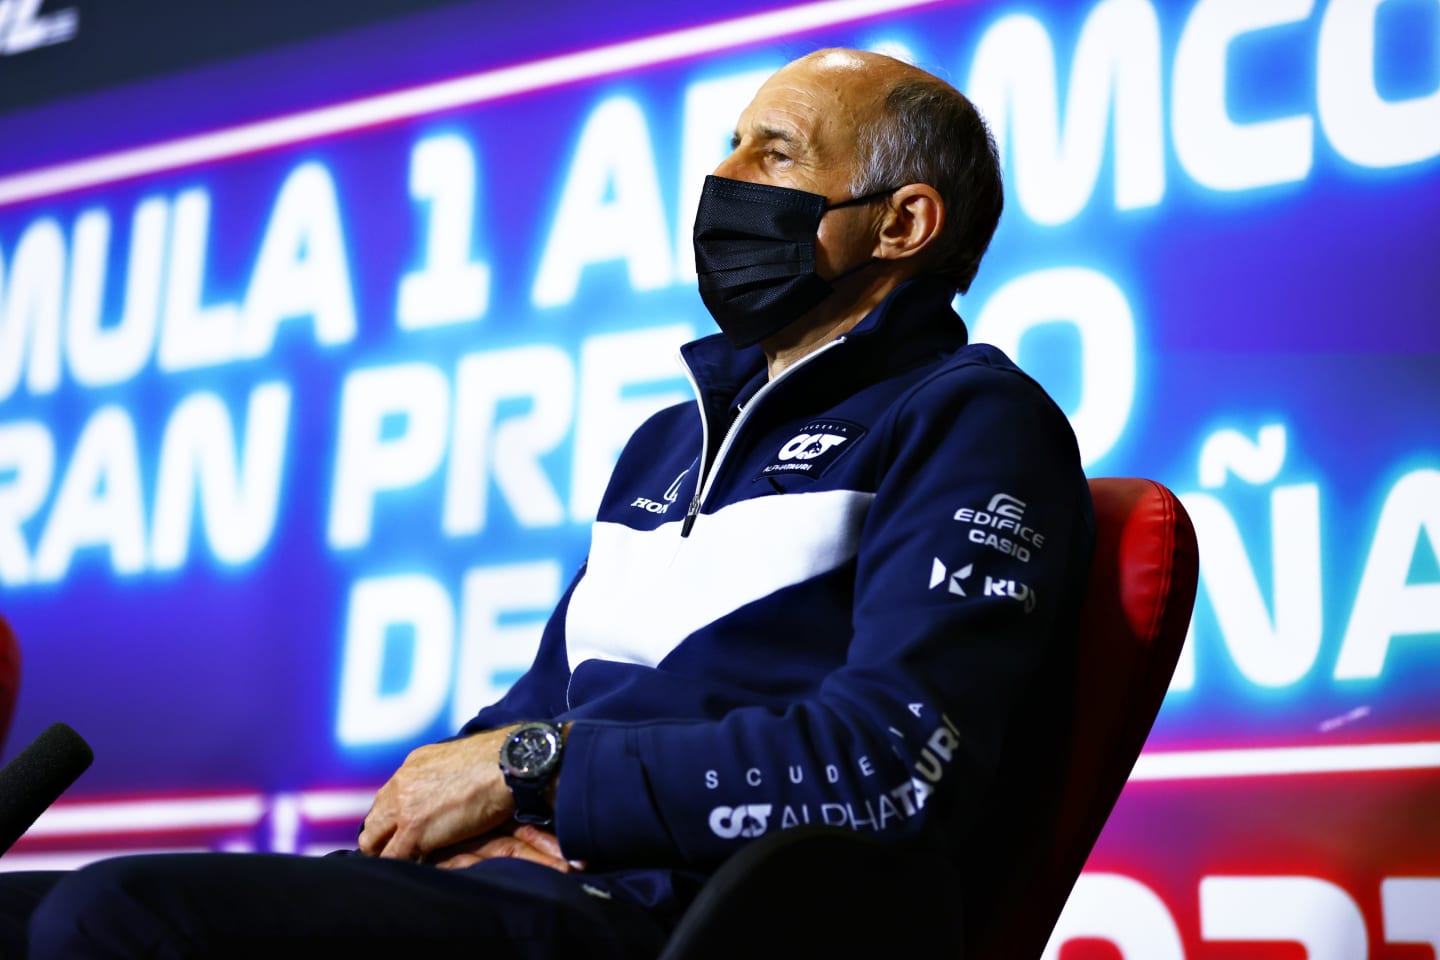 BARCELONA, SPAIN - MAY 07: Scuderia AlphaTauri Team Principal Franz Tost talks in the Team Principals Press Conference during practice for the F1 Grand Prix of Spain at Circuit de Barcelona-Catalunya on May 07, 2021 in Barcelona, Spain. (Photo by Dan Istitene/Getty Images)